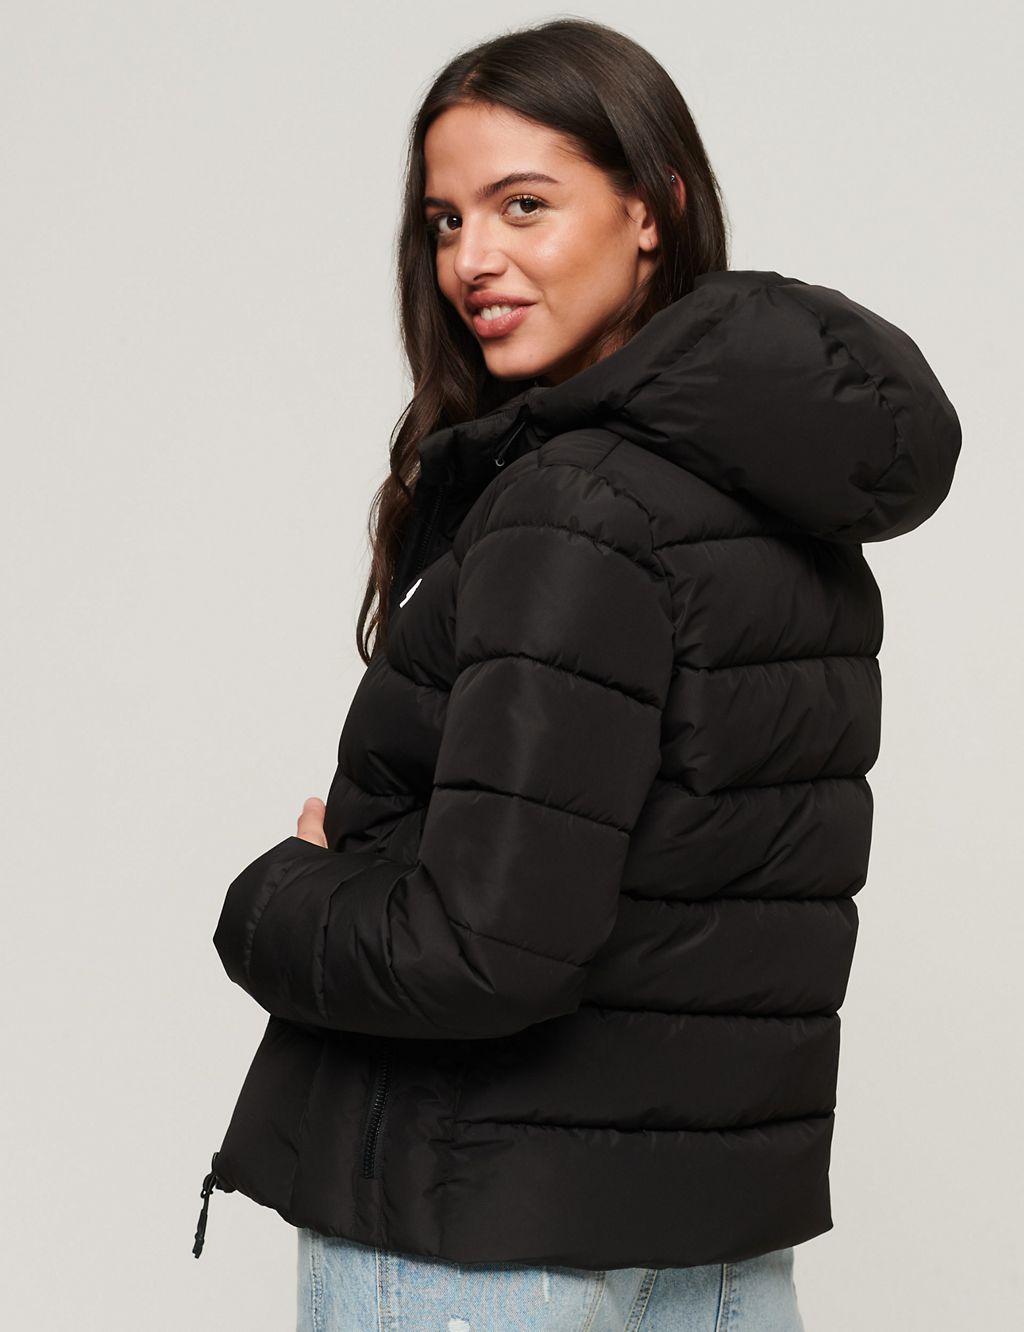 Hooded Padded Puffer Jacket | Superdry | M&S